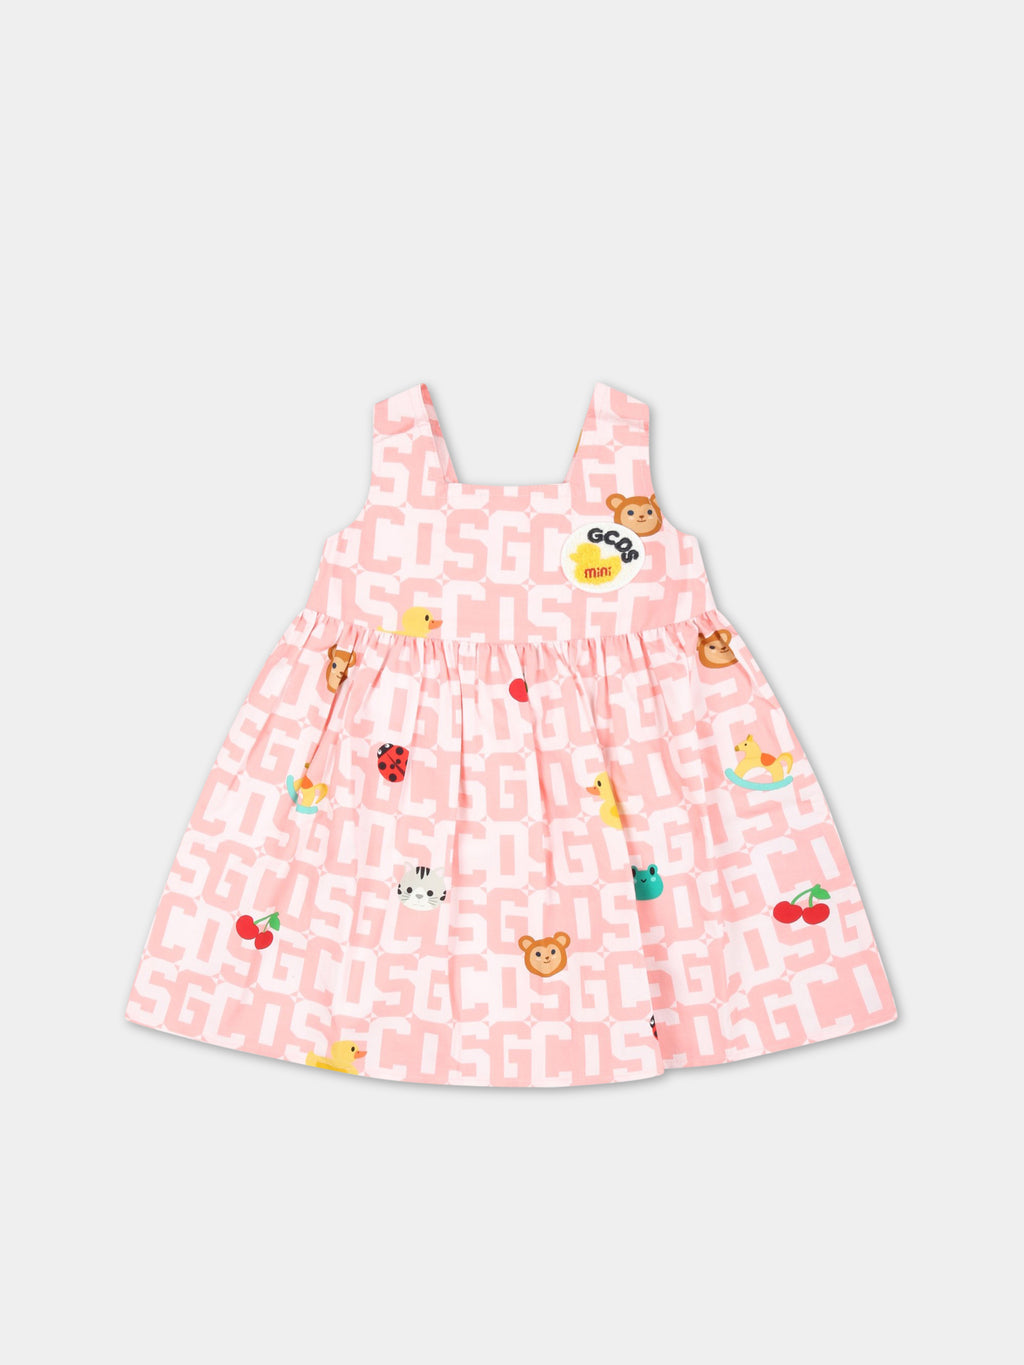 Pink dress for baby girl with logo patch